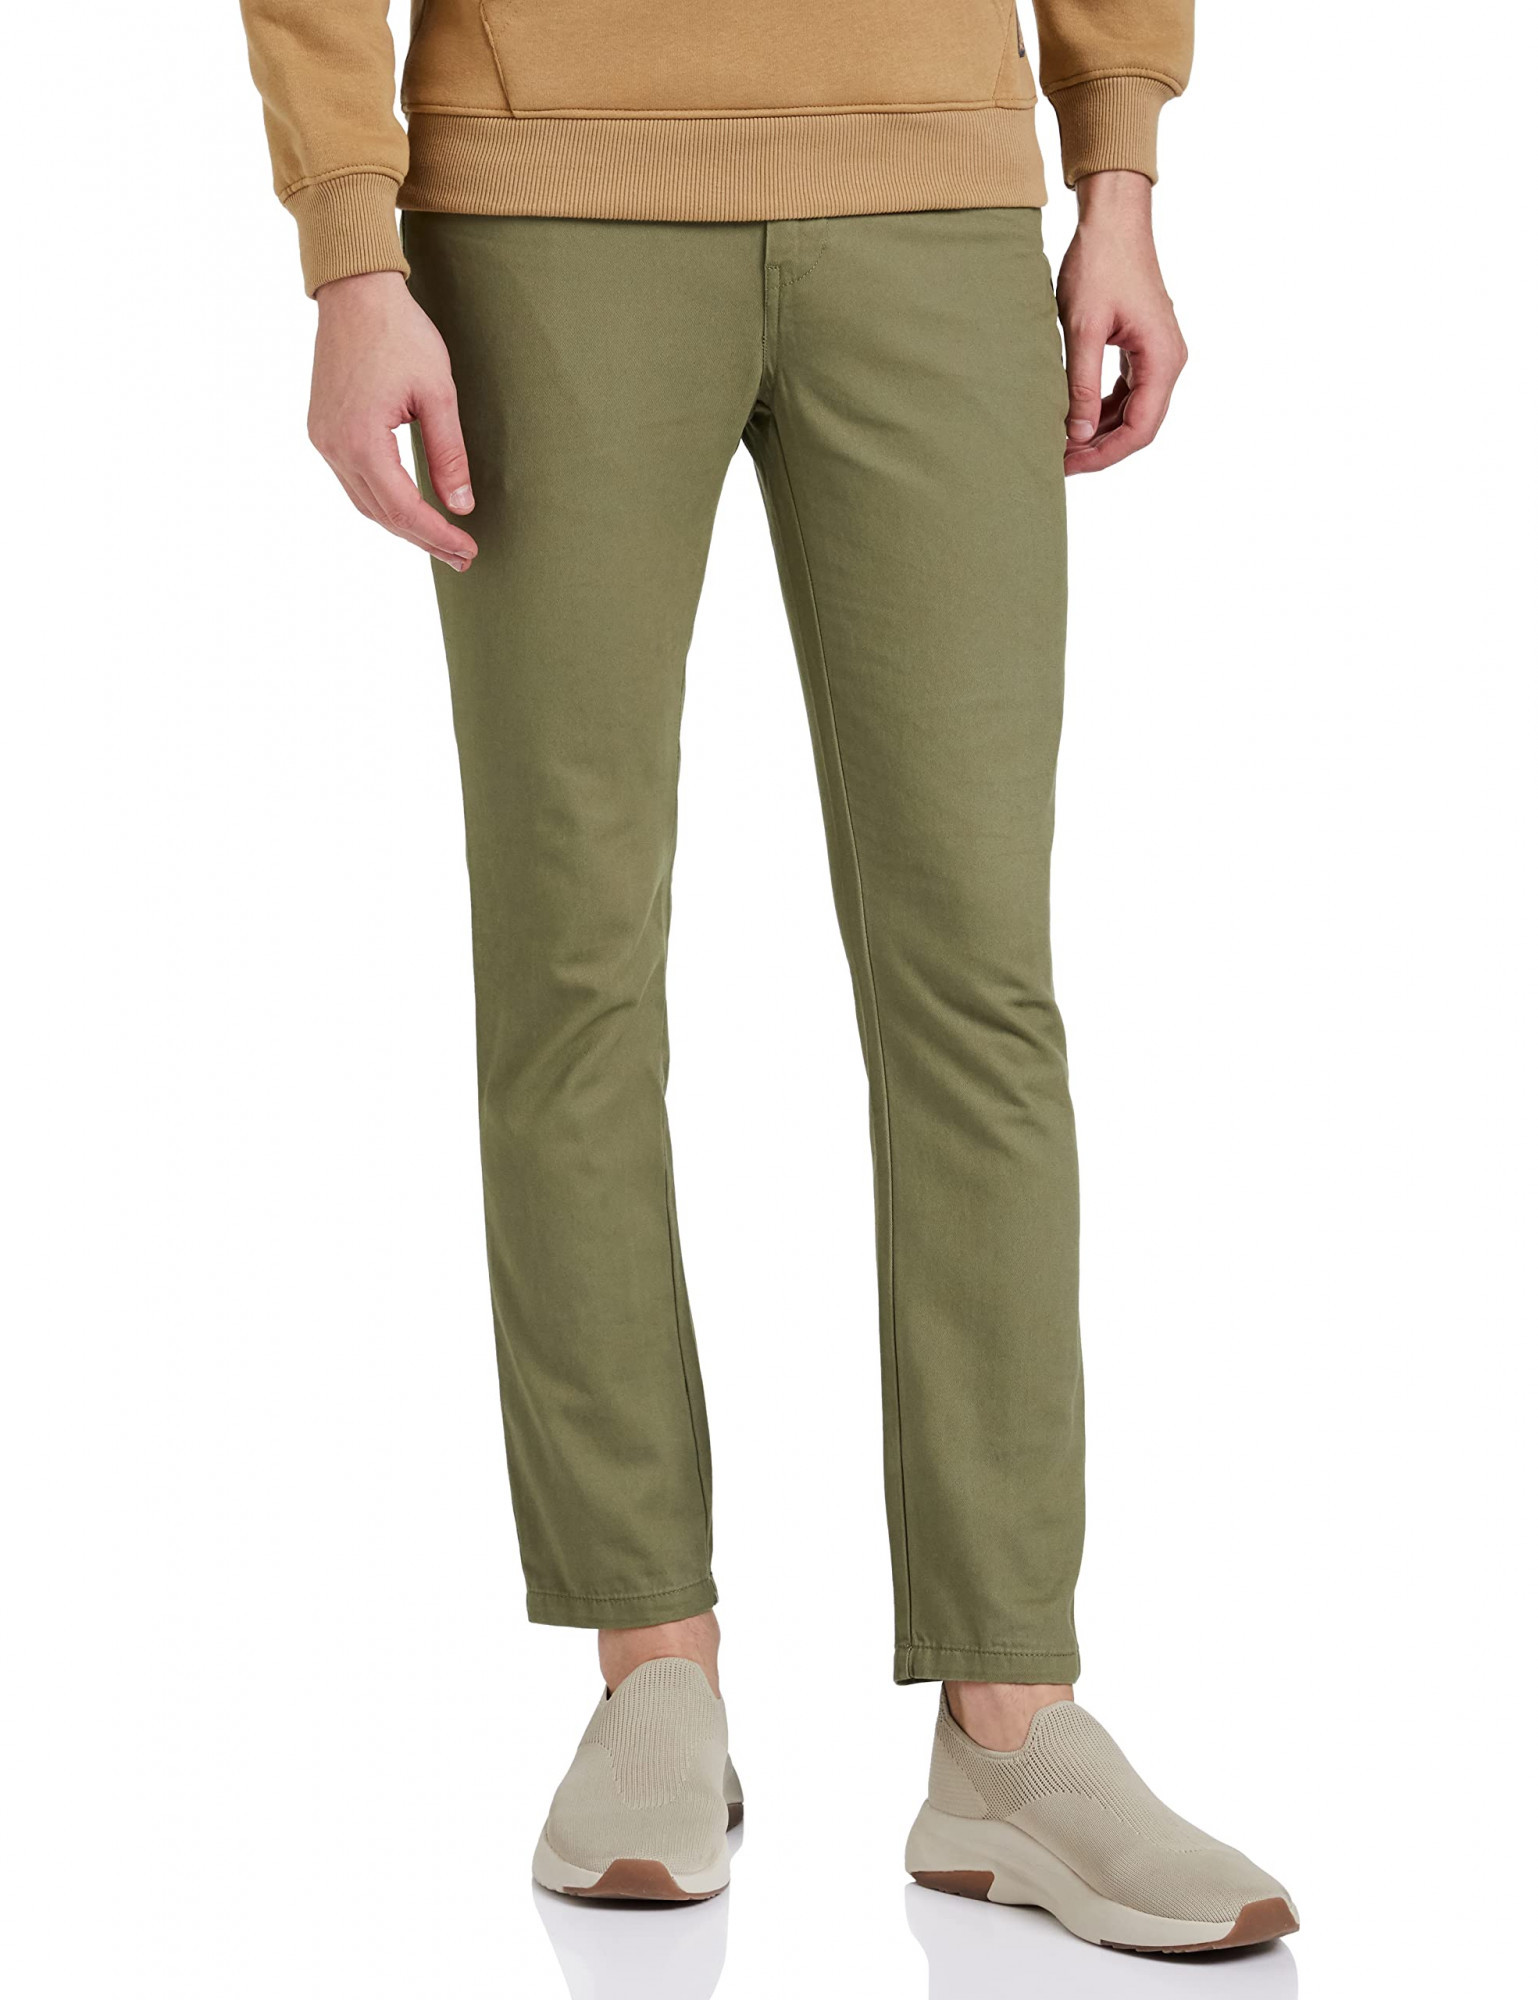 Latest LOW BRAND Trousers & Lowers arrivals - Men - 3 products | FASHIOLA  INDIA